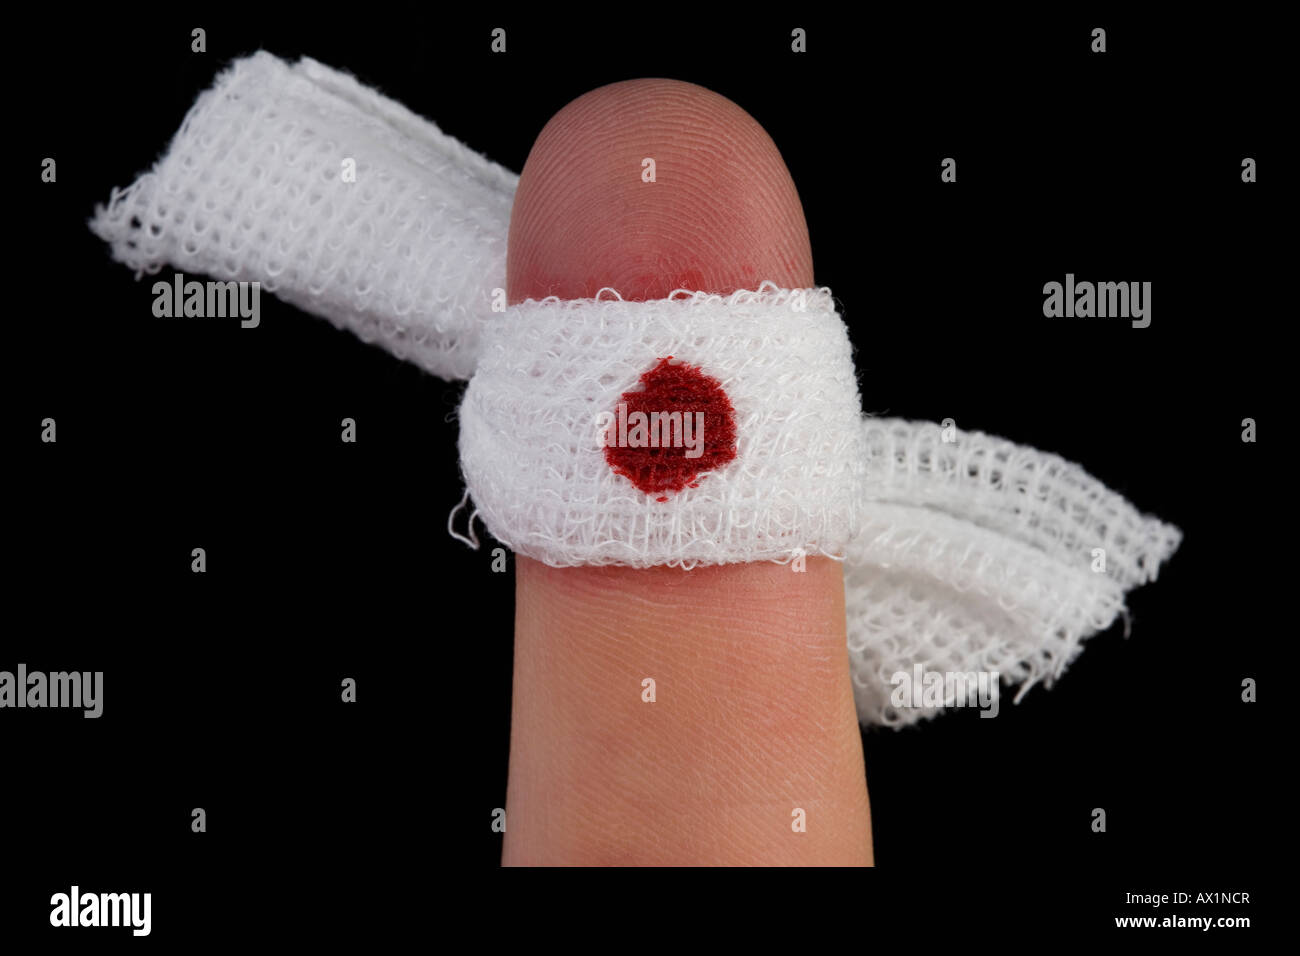 Wound Bleeding Stock Photos And Wound Bleeding Stock Images Alamy